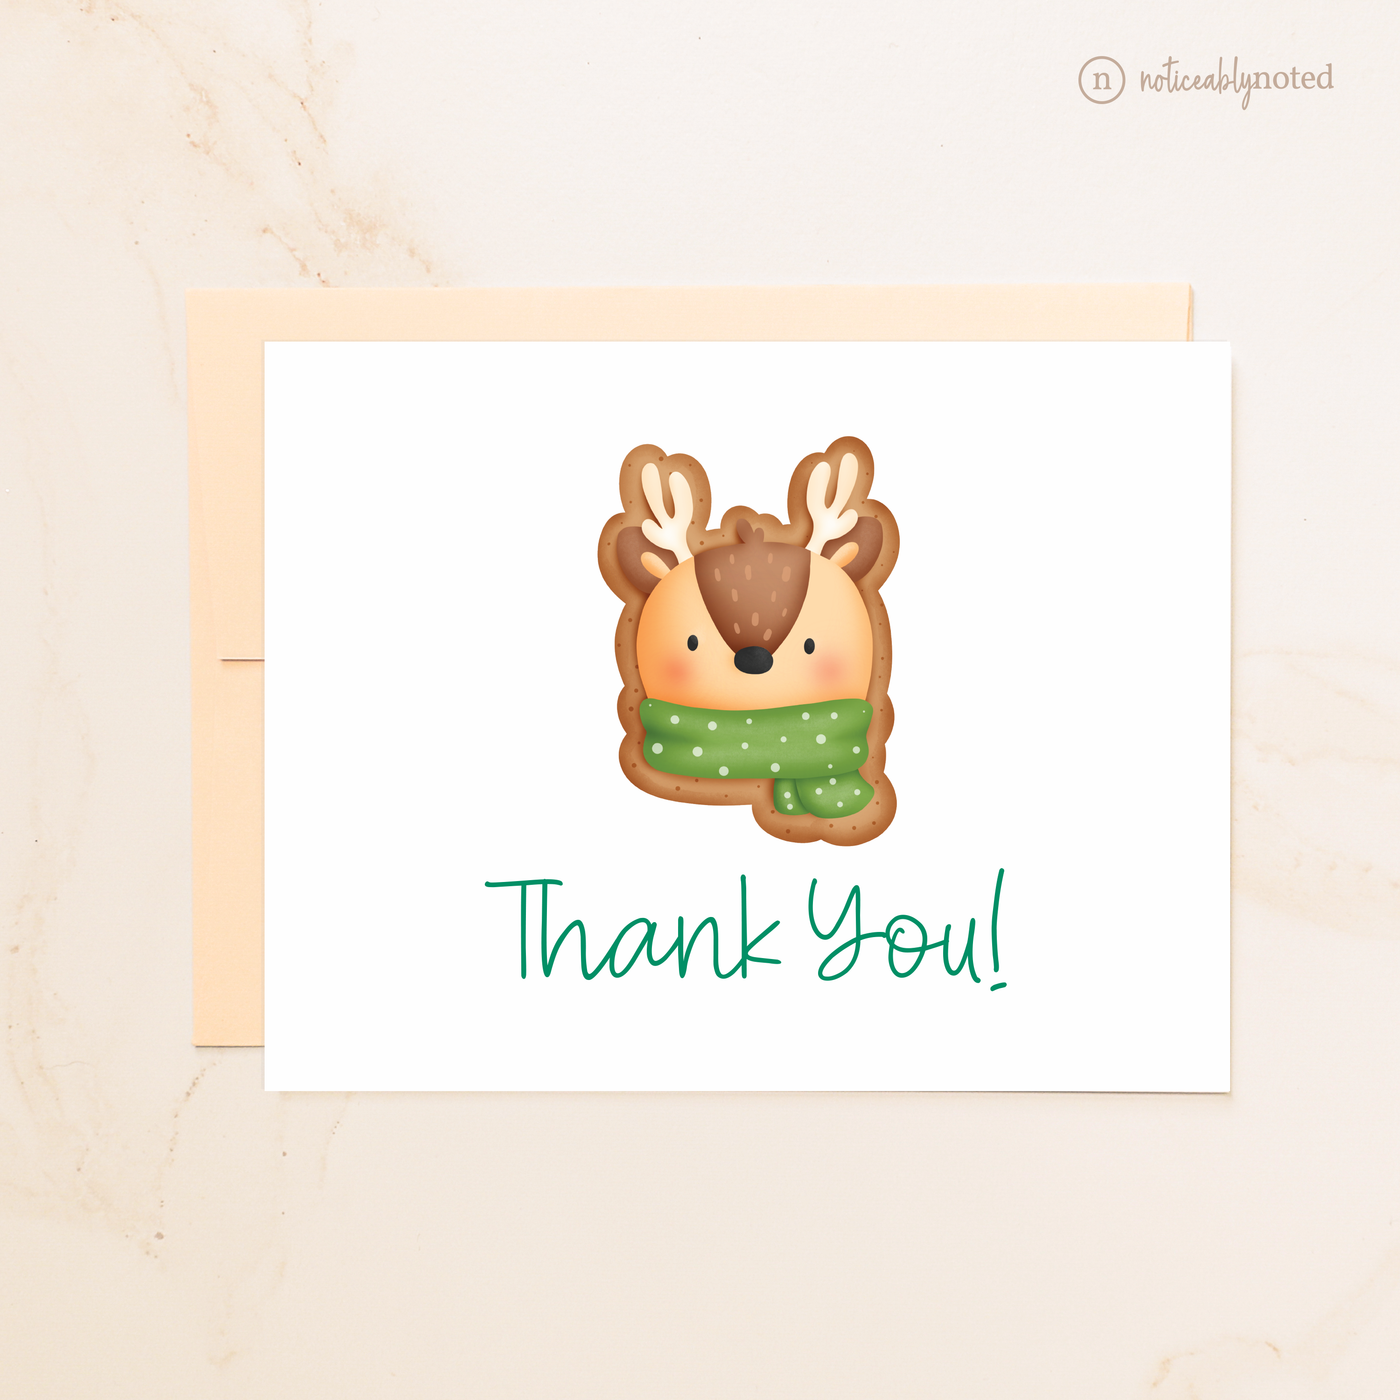 Reindeer Cookie Folded Thank You Cards | Noticeably Noted